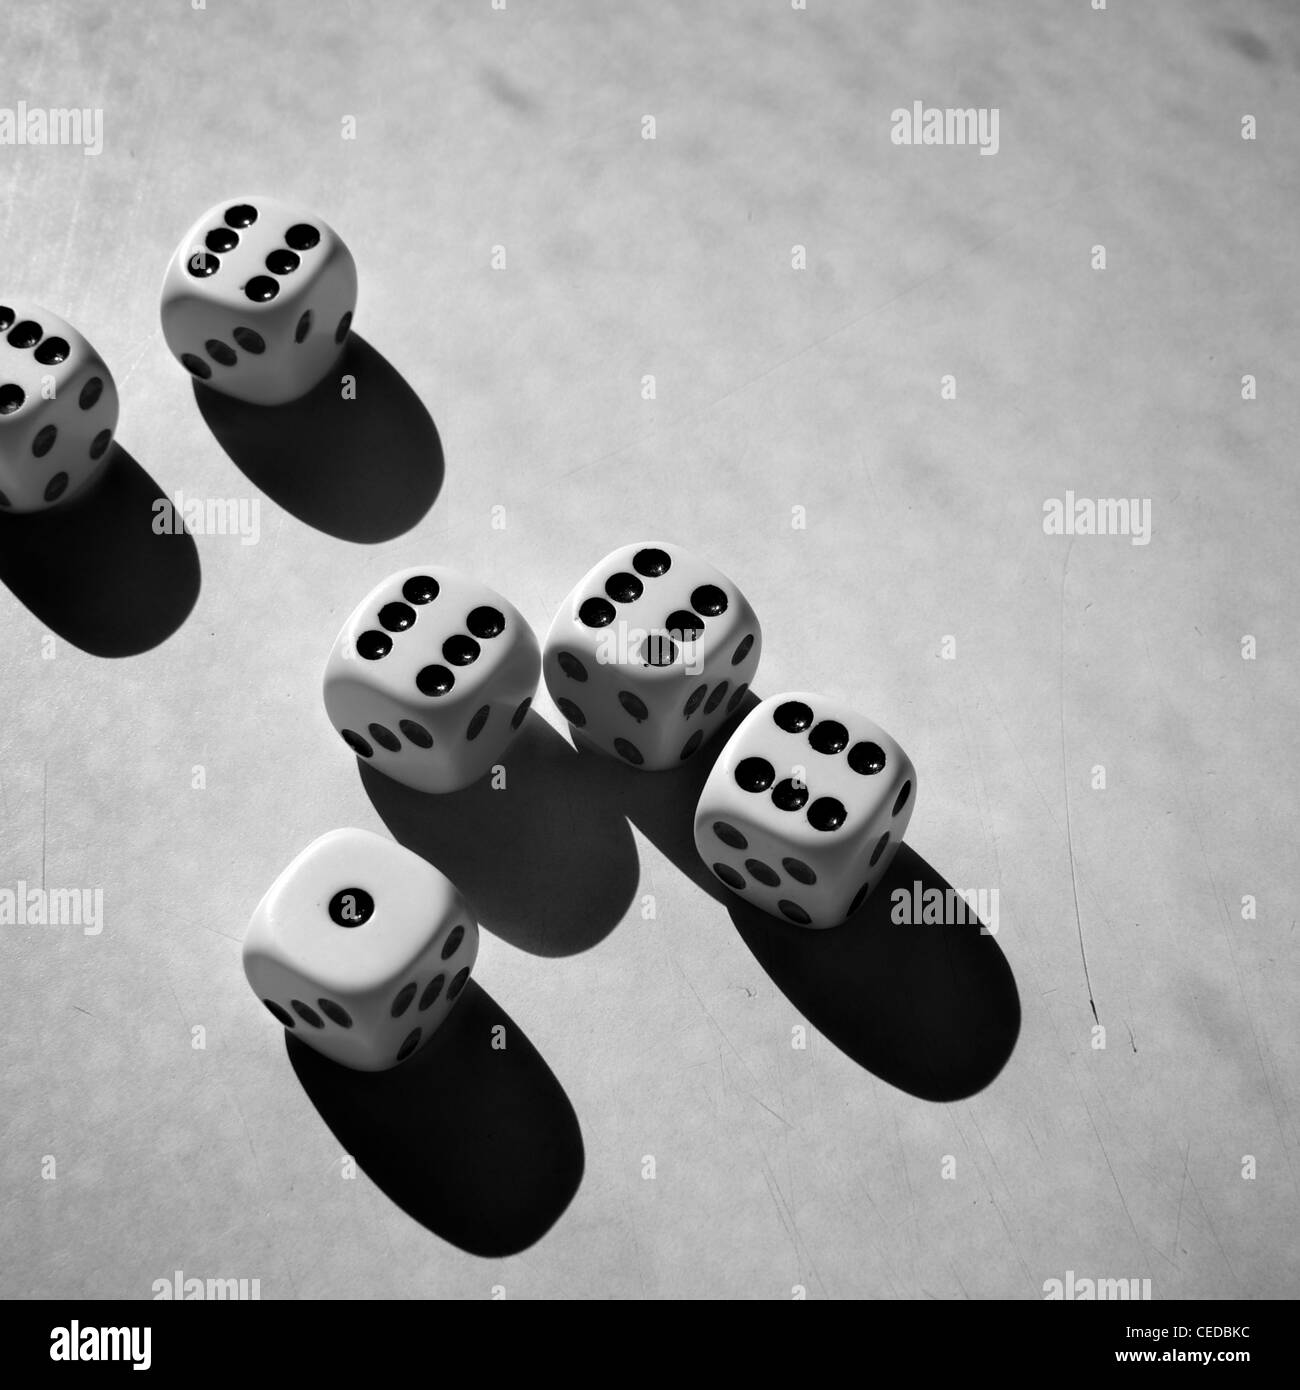 Six dices on a grungy scratched surface. Cropped image. Squared format. Black and white photo. Stock Photo